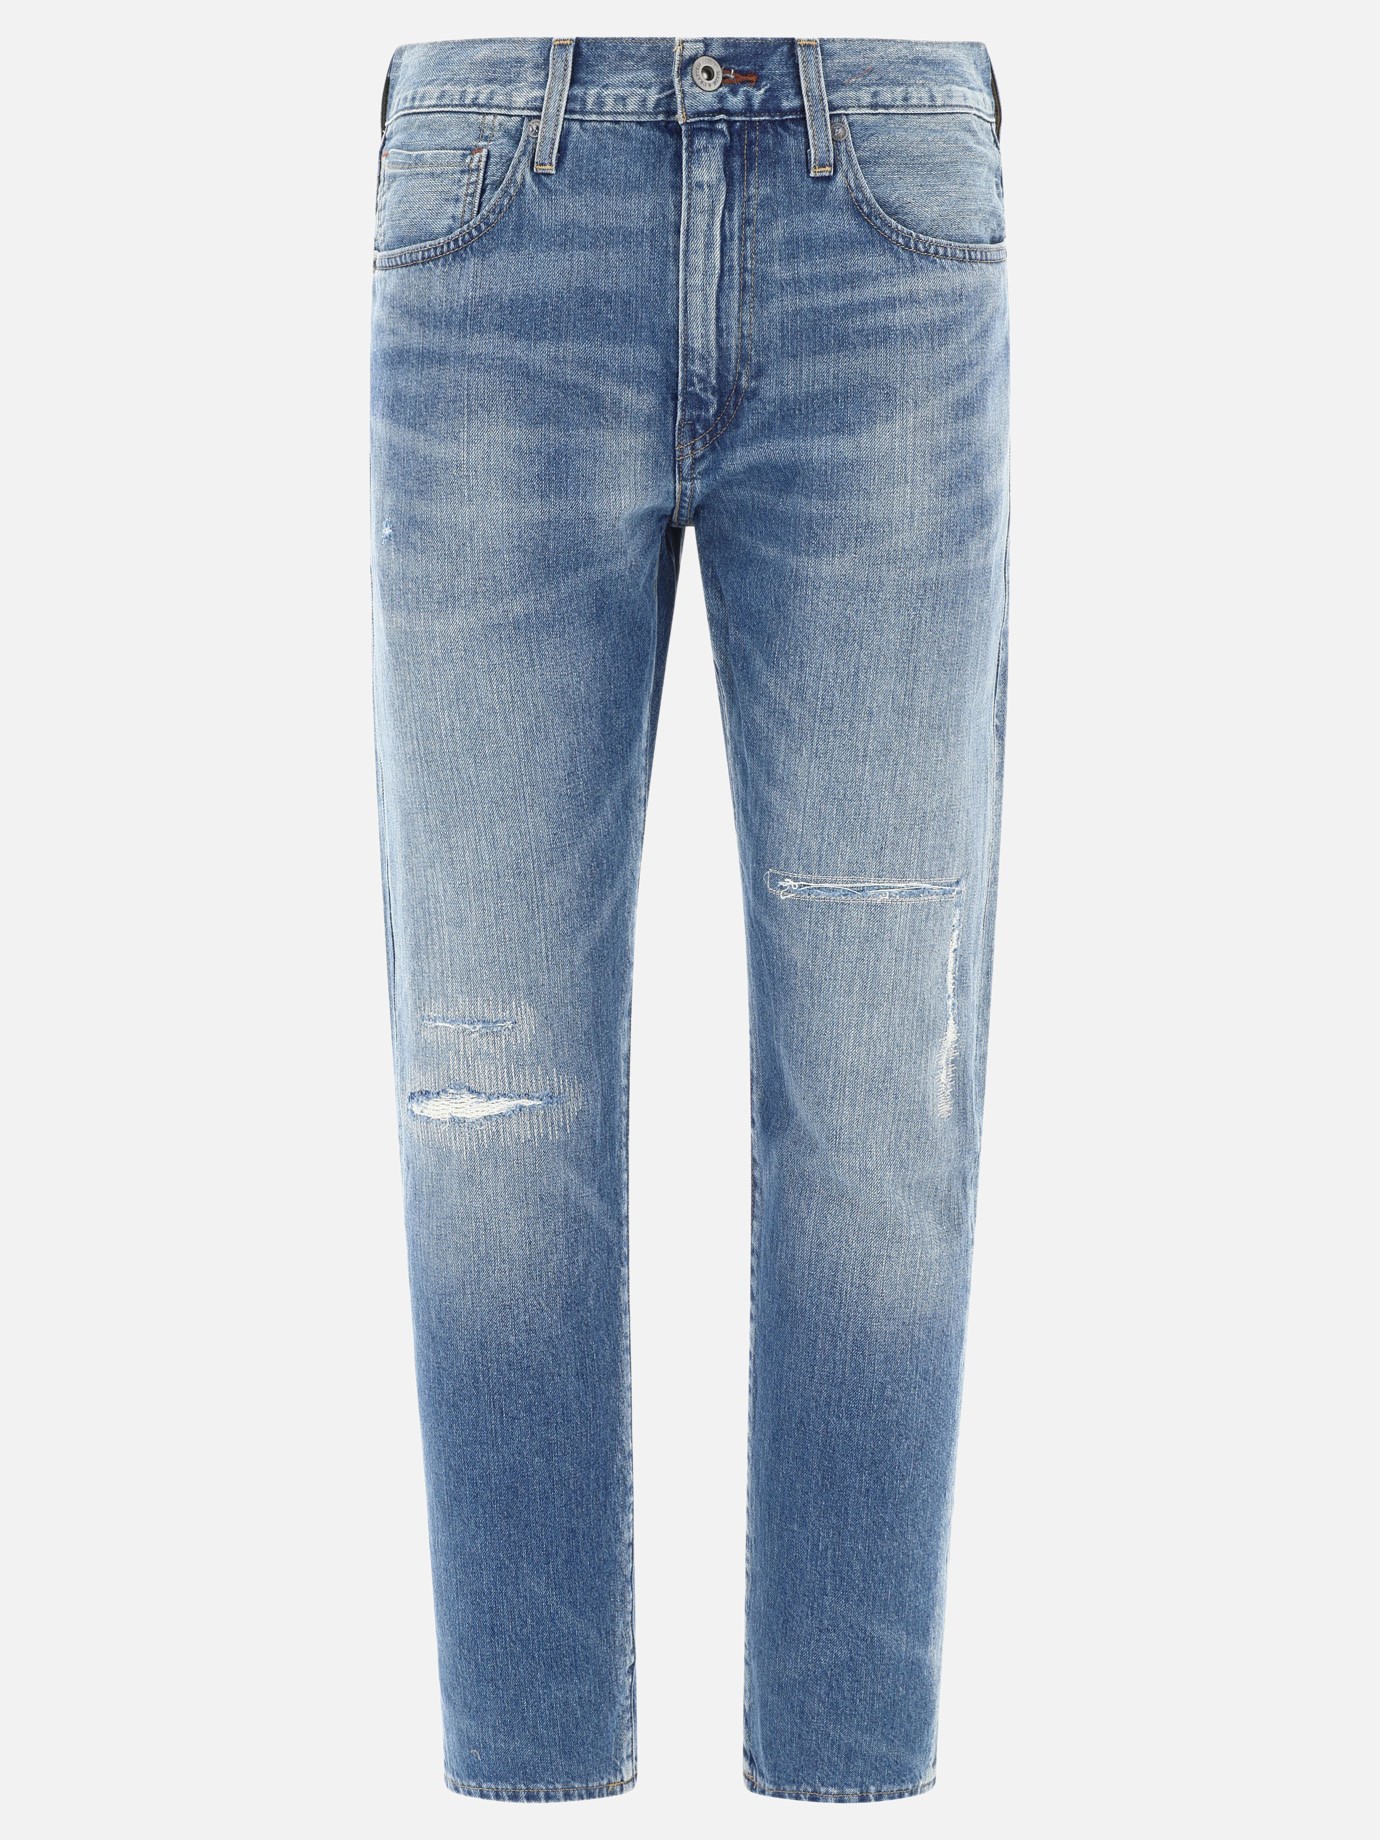 Jeans  502 Taper by Levi's Made & Crafted - 5